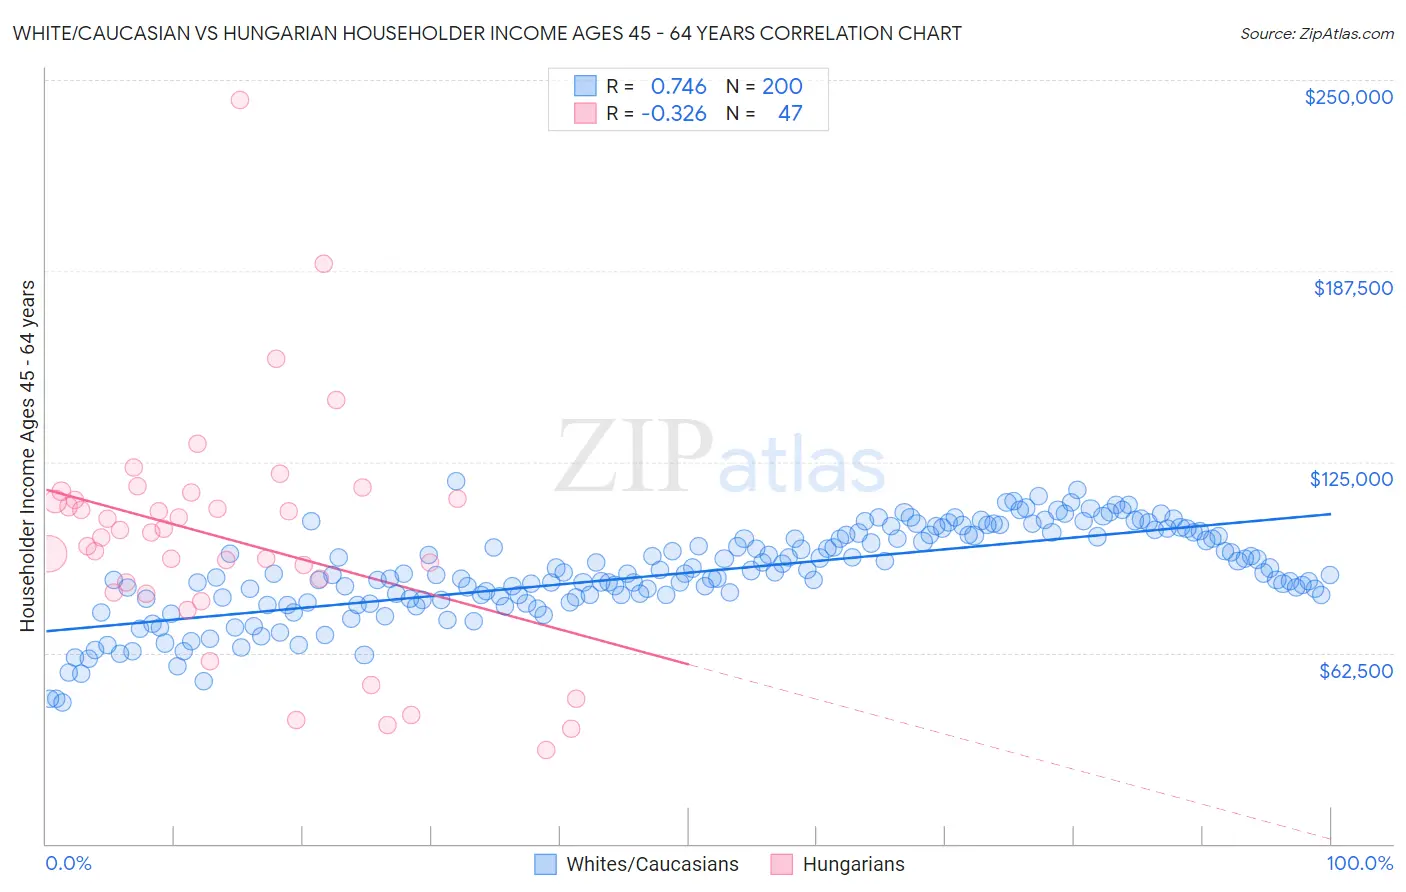 White/Caucasian vs Hungarian Householder Income Ages 45 - 64 years